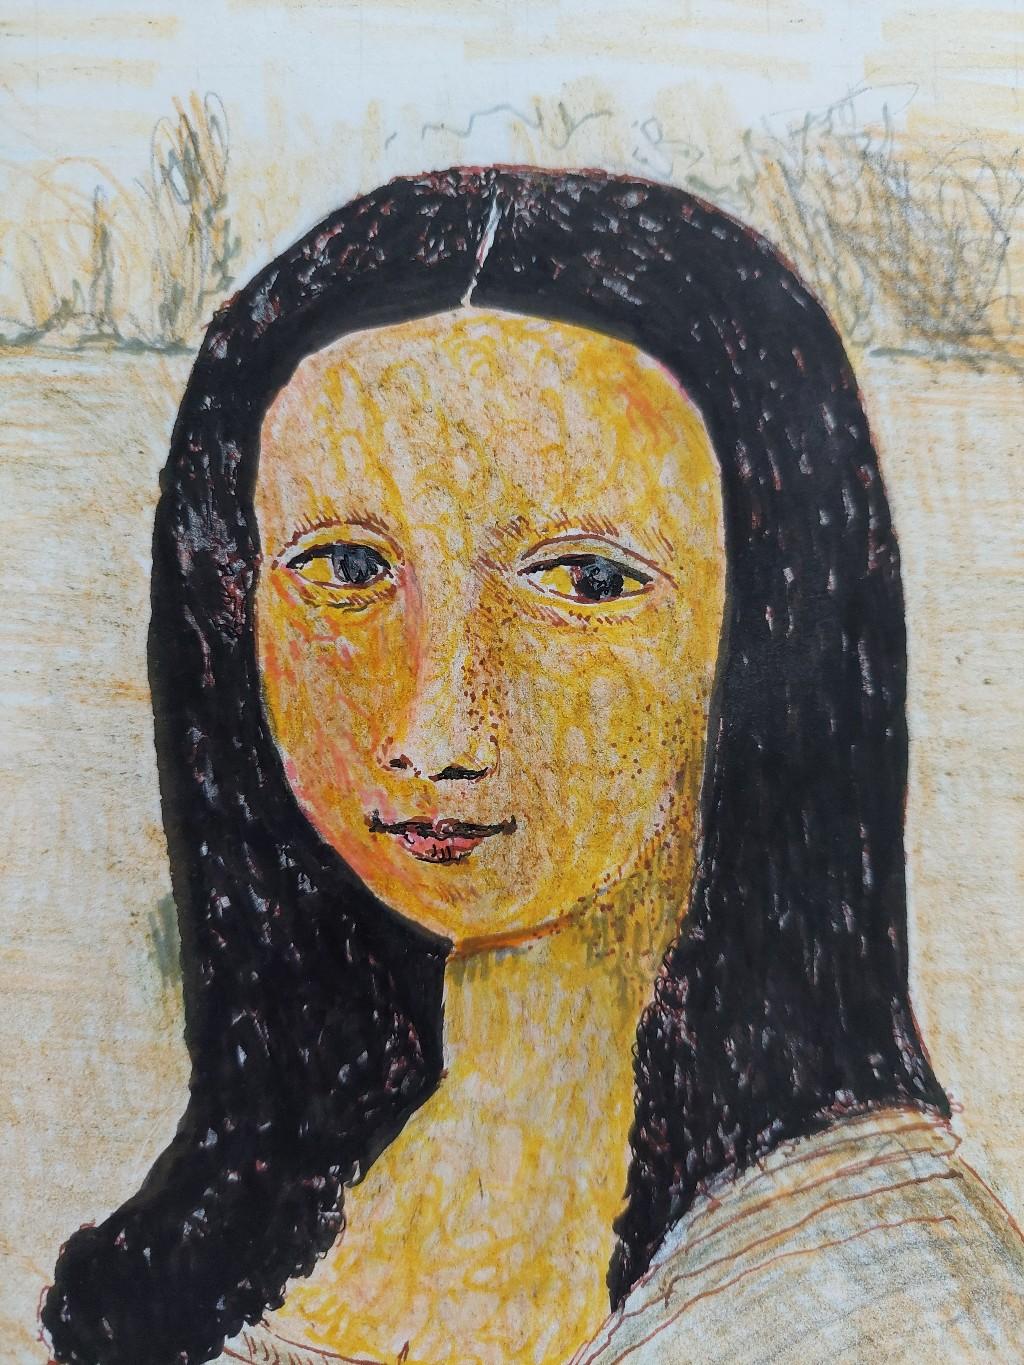 20th Century French Modernist Cubist Painting, Mona Lisa Study  For Sale 1